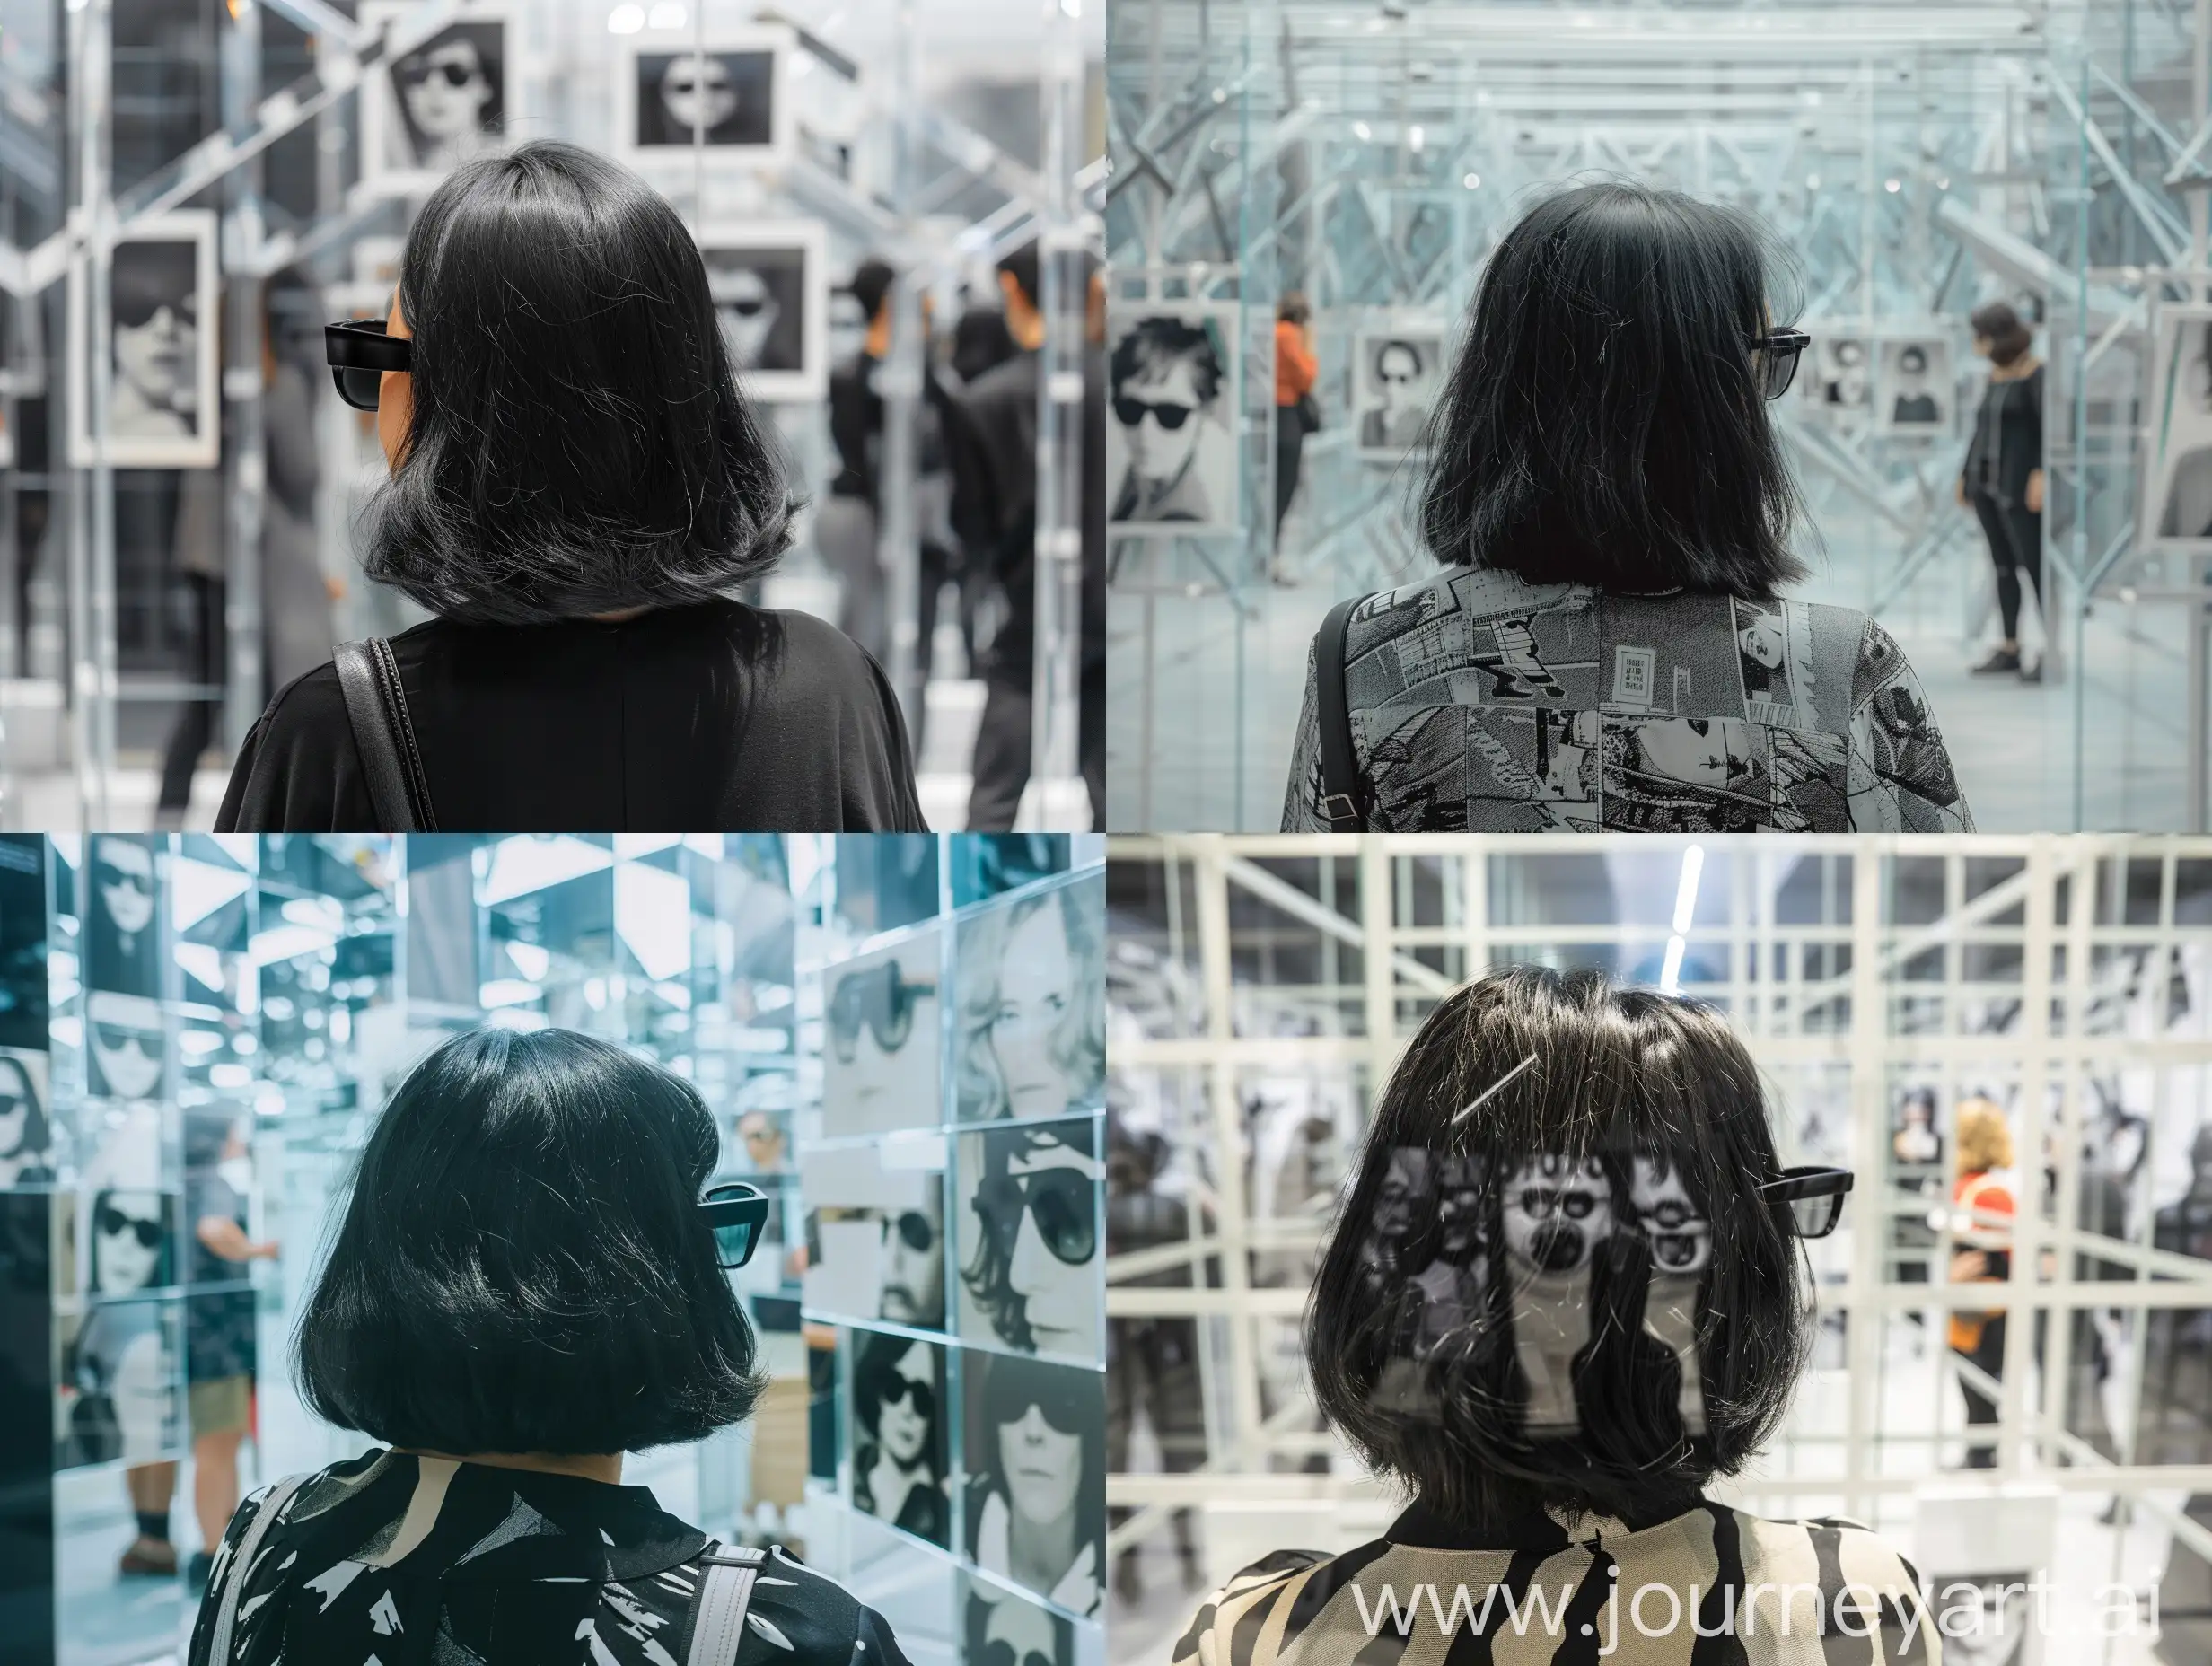 We see from behind. A 40old lady with black medium hair in a contemprary gallery, exhibition looks somehow like glass mazes and includes pictures in black and white of her taken in random way (not too clear). Vistiors are inside the fgallery all are wearing black sunglasses.